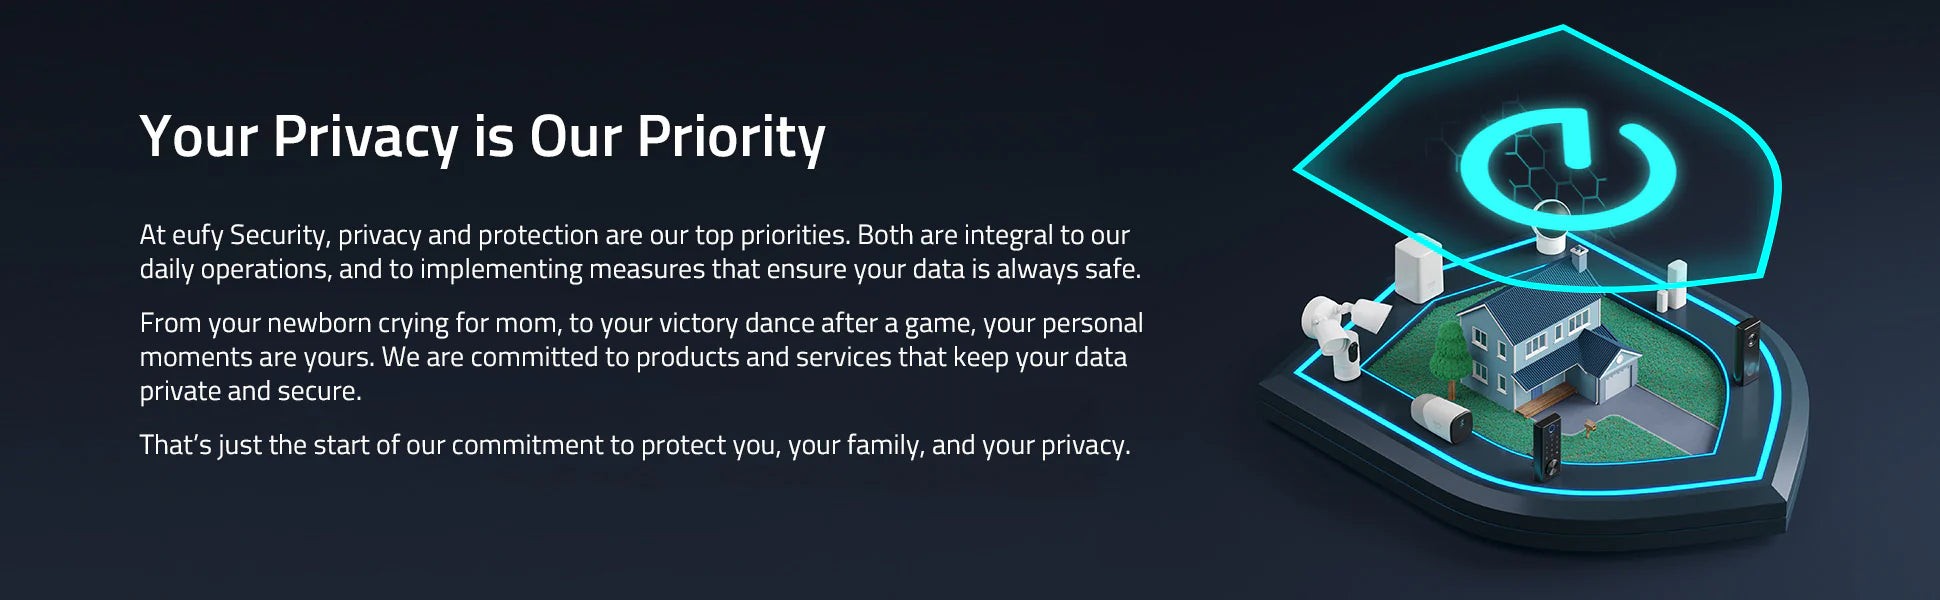 Your_Privacy_is_Our_Priority.webp__PID:f4748ede-a276-4696-8652-fb61462077eb